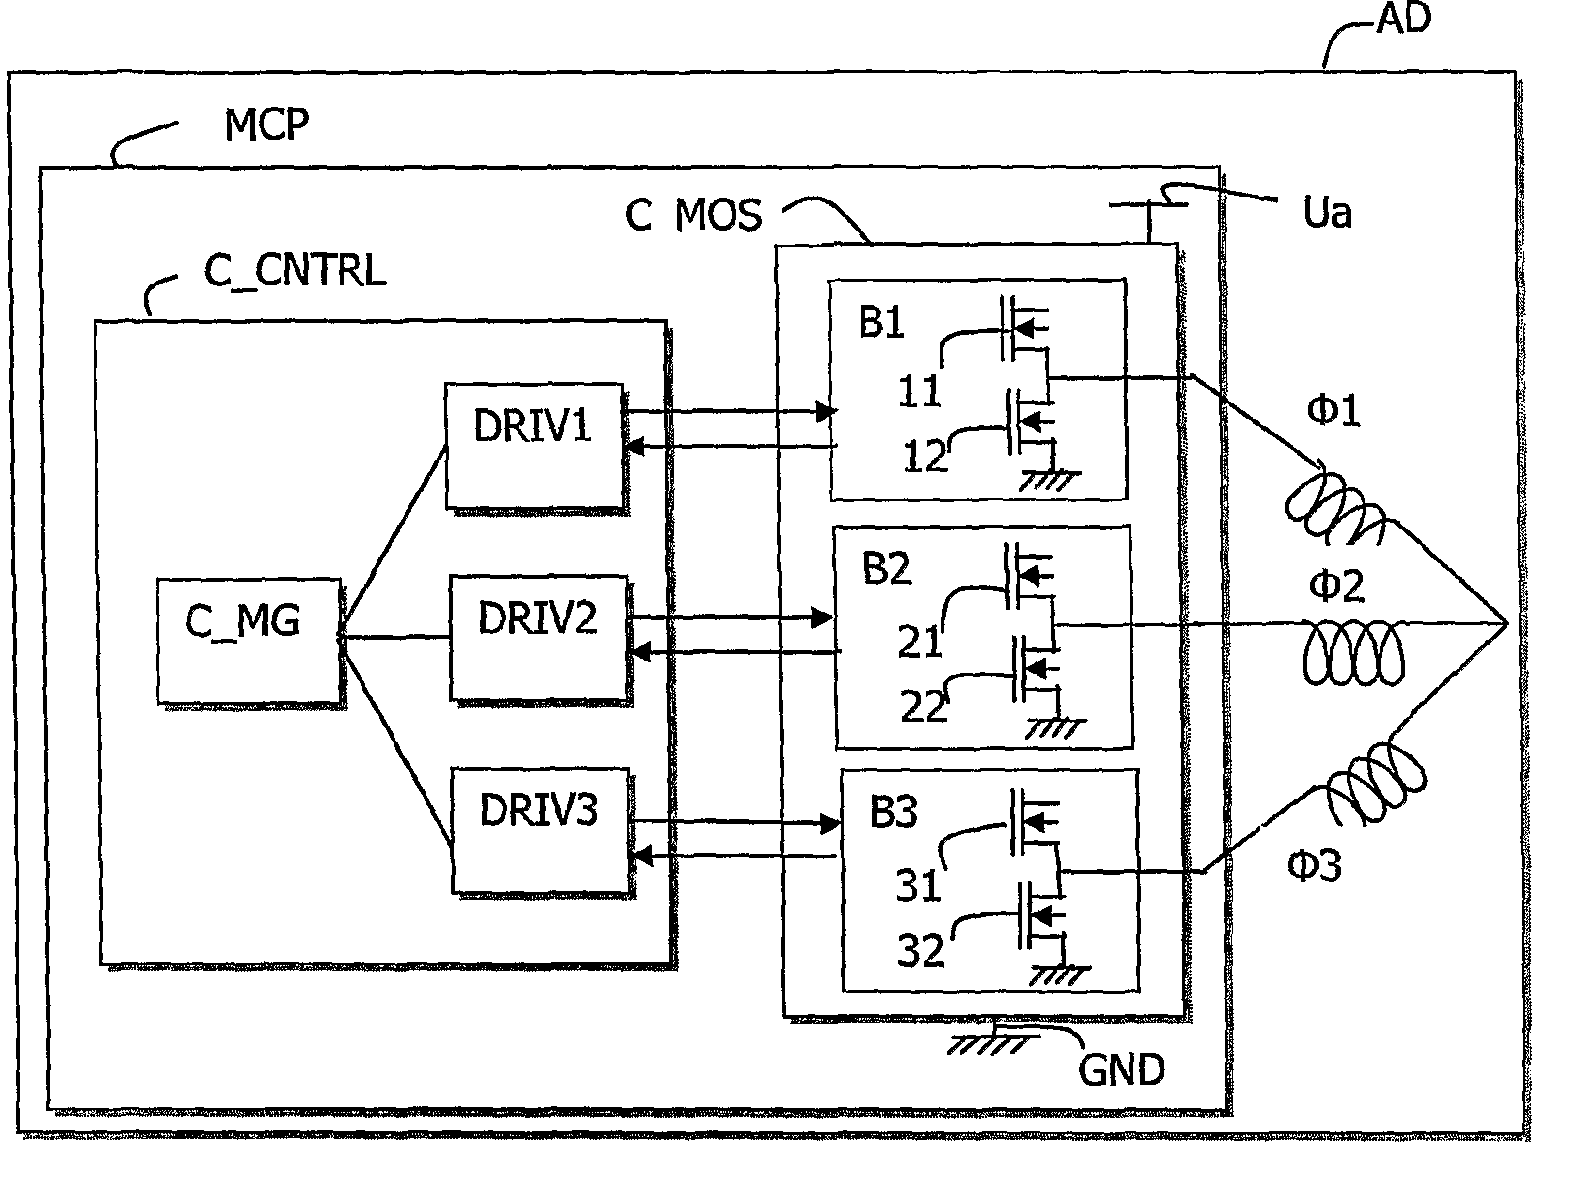 Control and power device for a rotating electrical machine